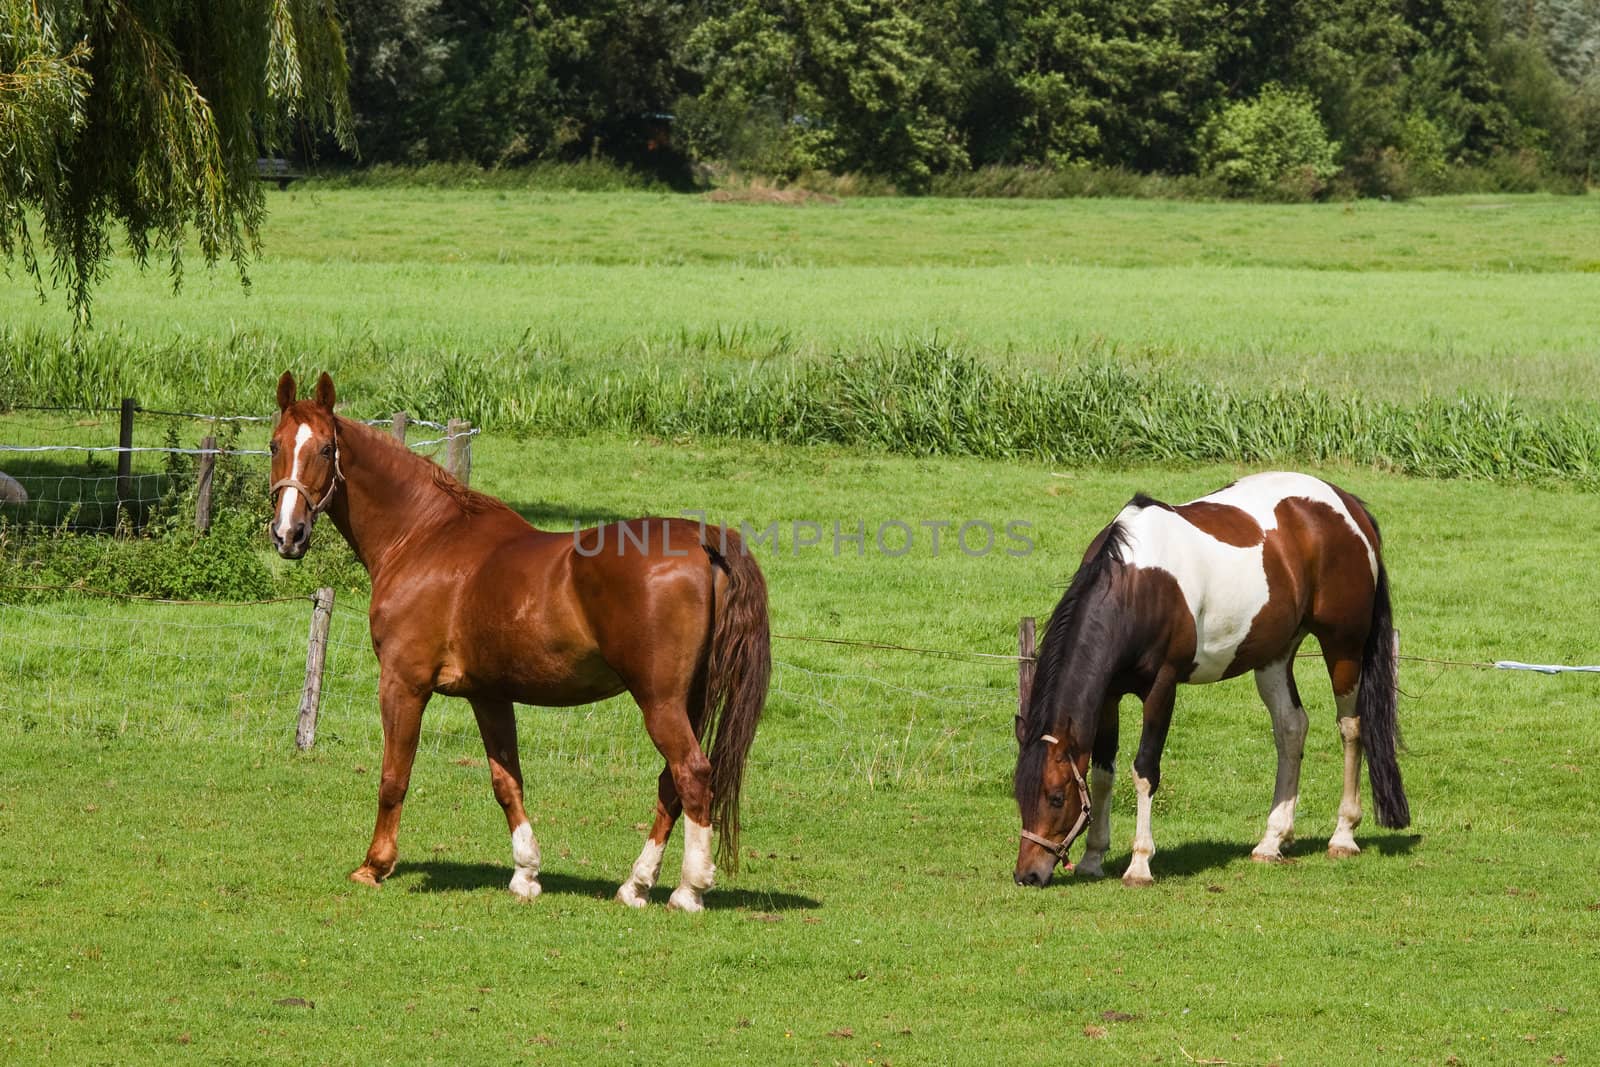 Grassland with two horses on sunny summerday in the country